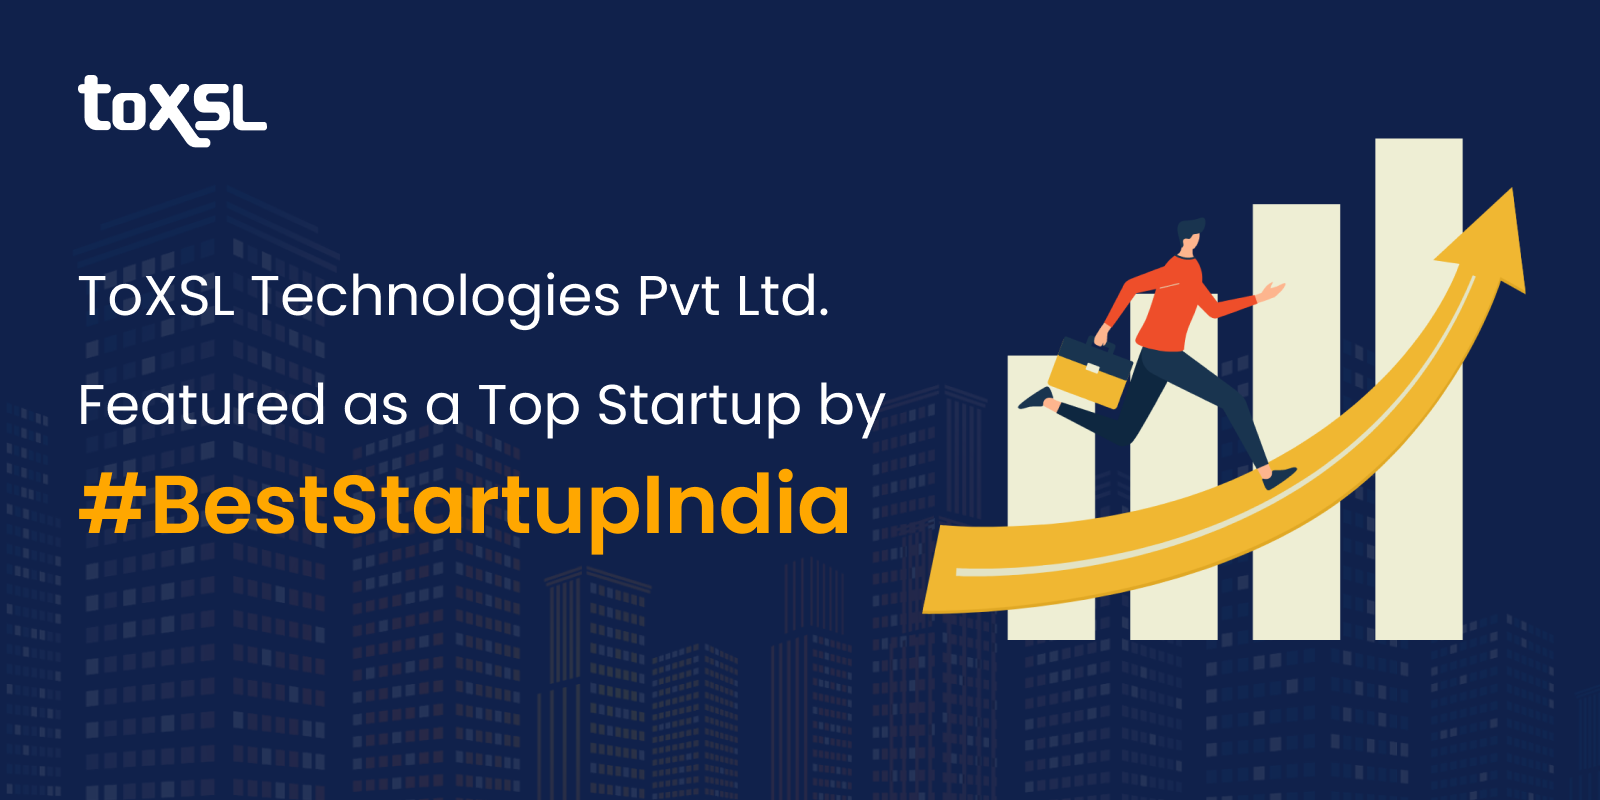 ToXSL Technologies Pvt Ltd. Featured as a Top Startup by Best Startup India